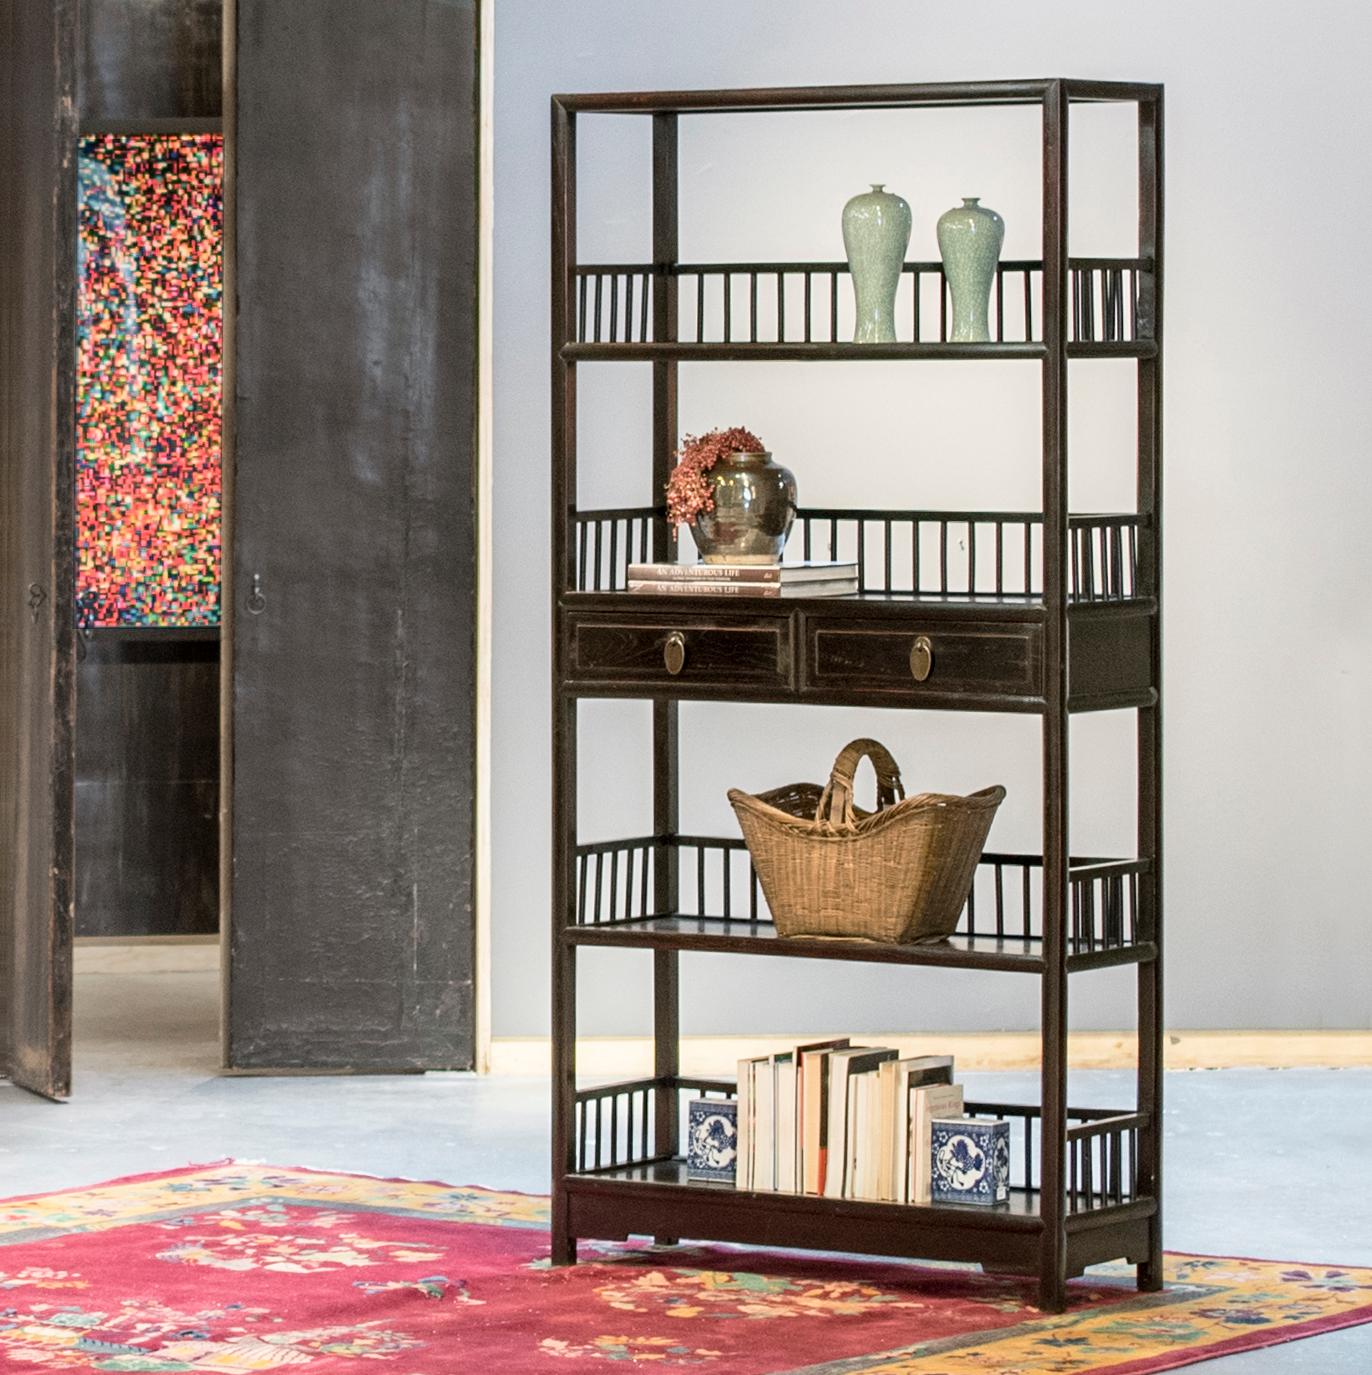 Dated to the early 20th century, these upright display shelves are constructed with lightweight frames, open sides, and low slatted railings enclosing each shelf. The pair's clean lines are accentuated by a dark brown-black finish, lightly faded at